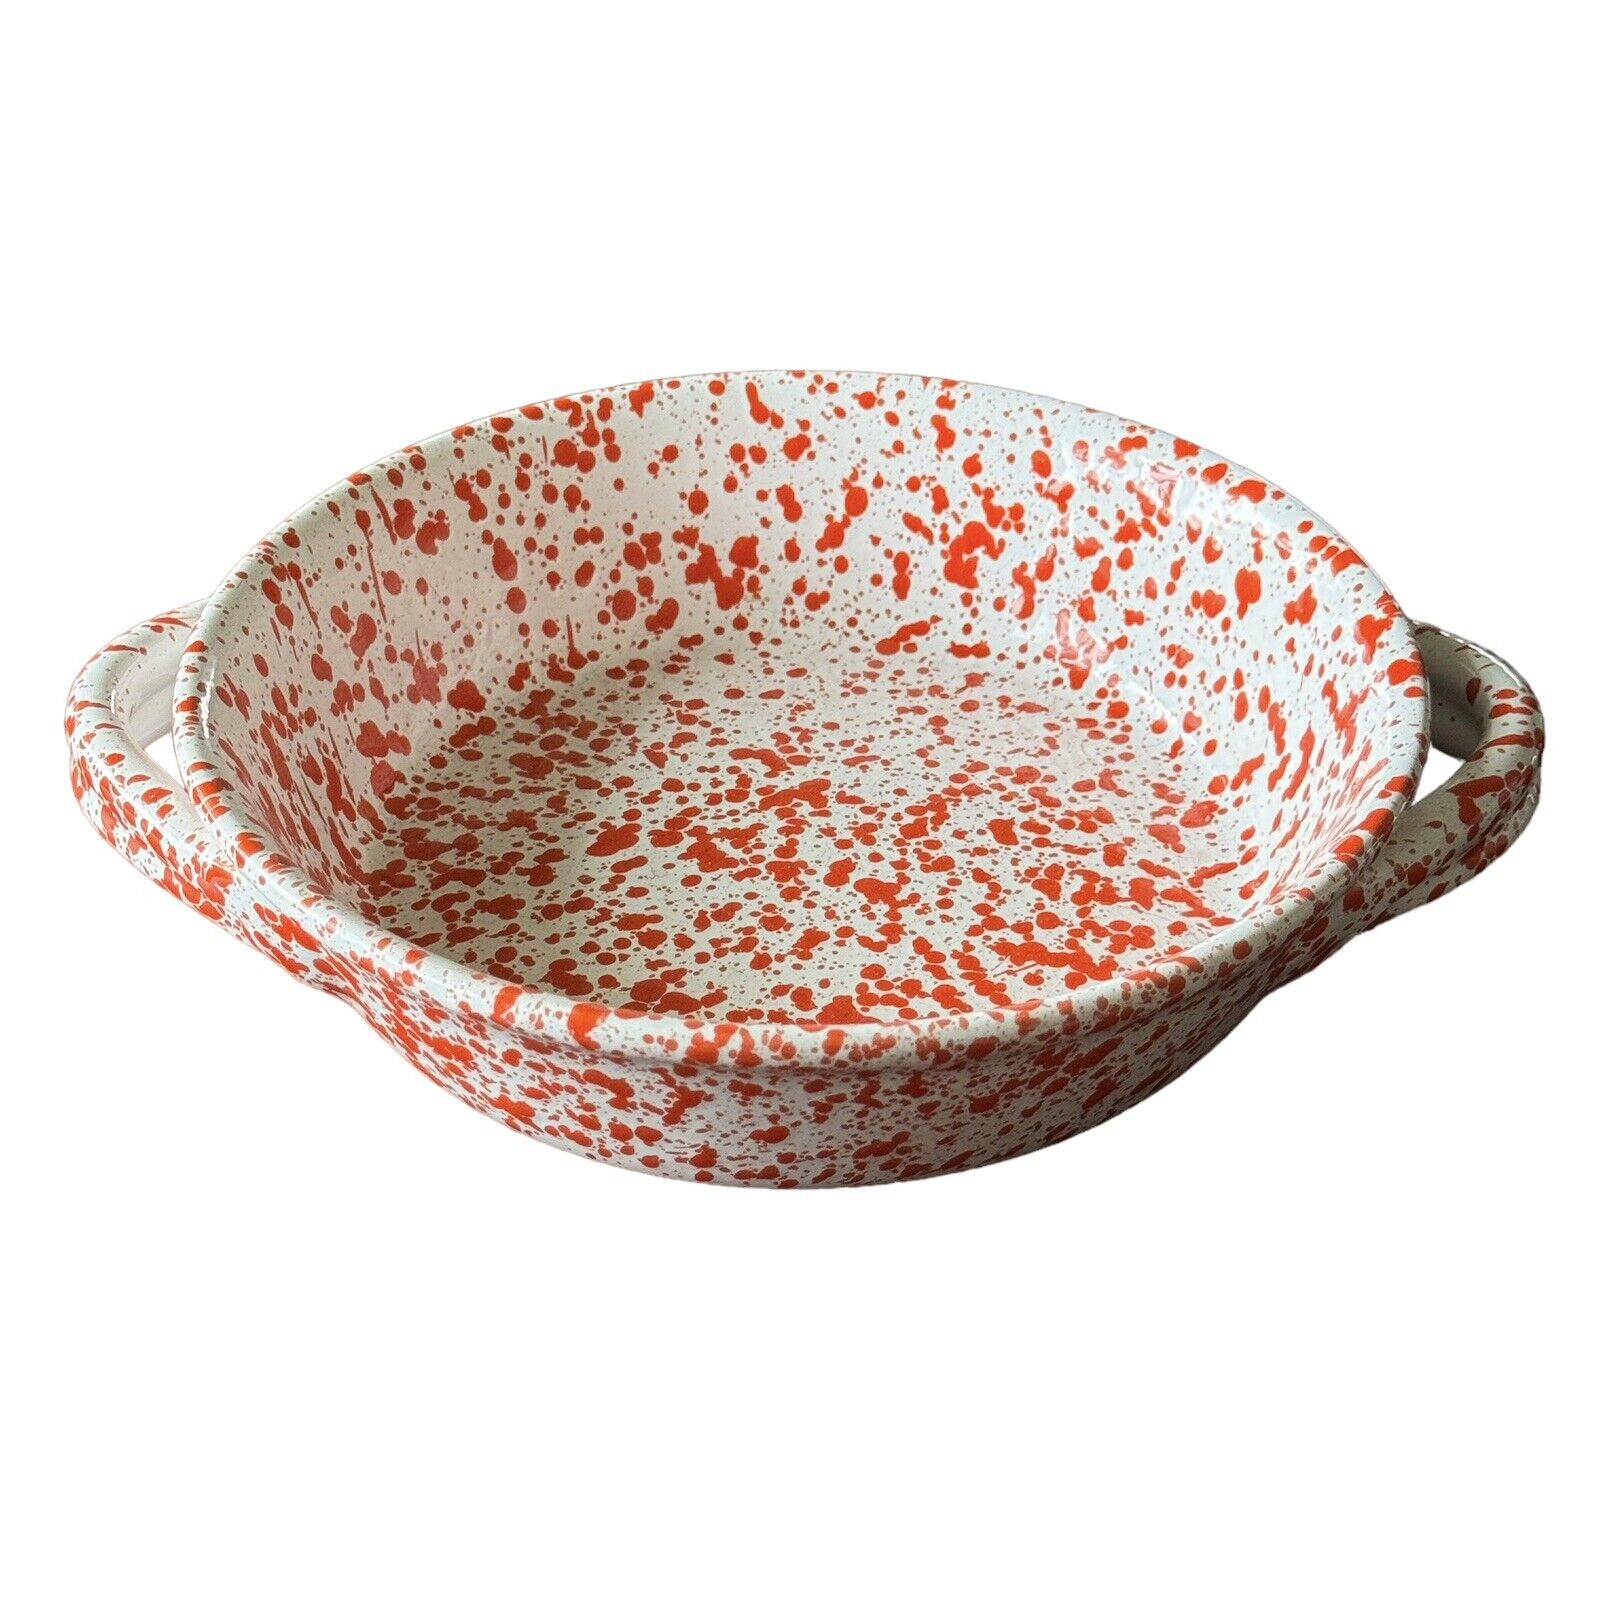 Vintage MCM Ceramiche Alfa Italy Red & White Speckled Marbled Pottery Pie Dish